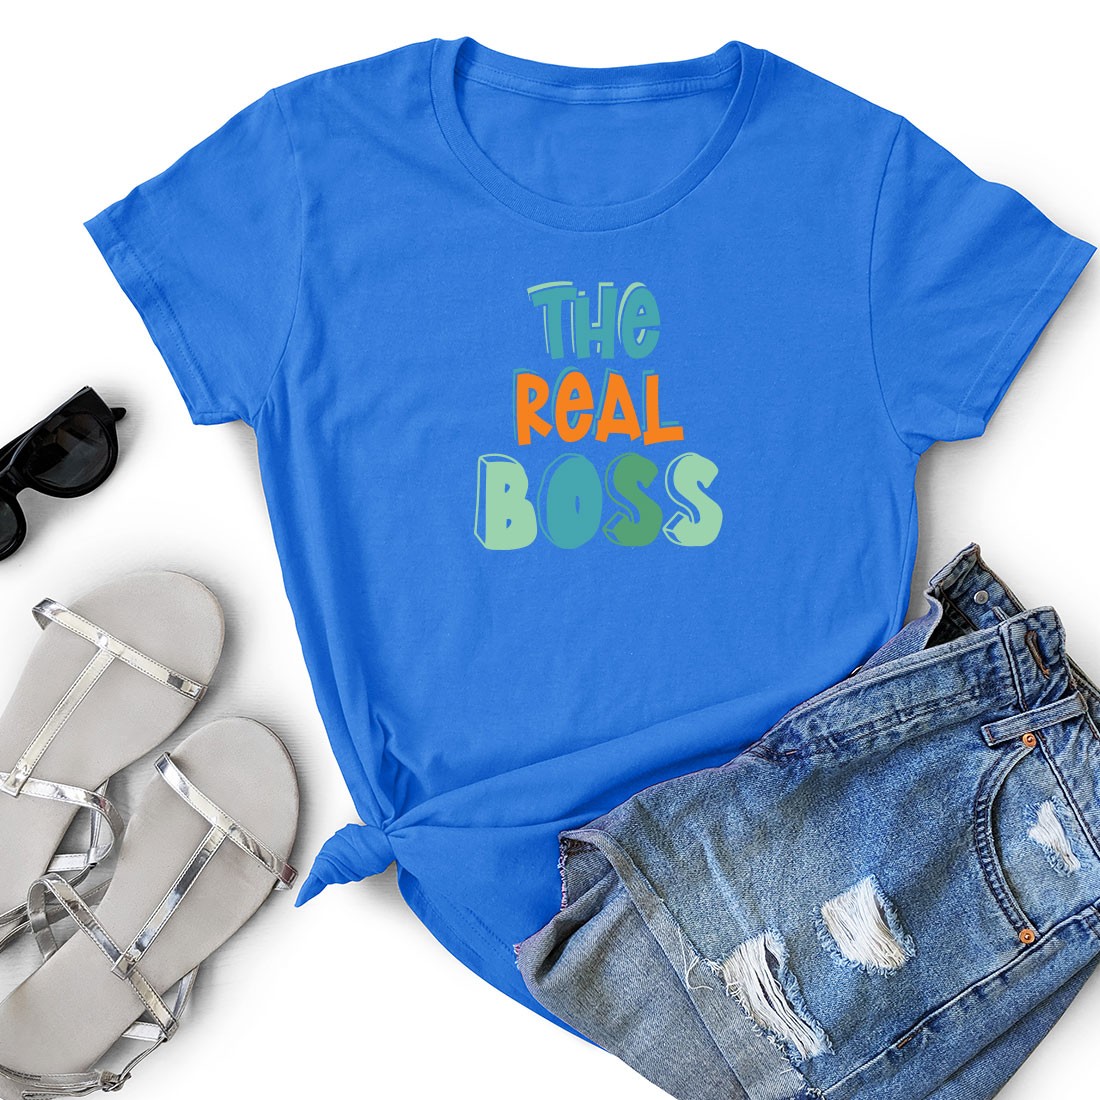 T - shirt that says the real boss next to a pair of shorts.